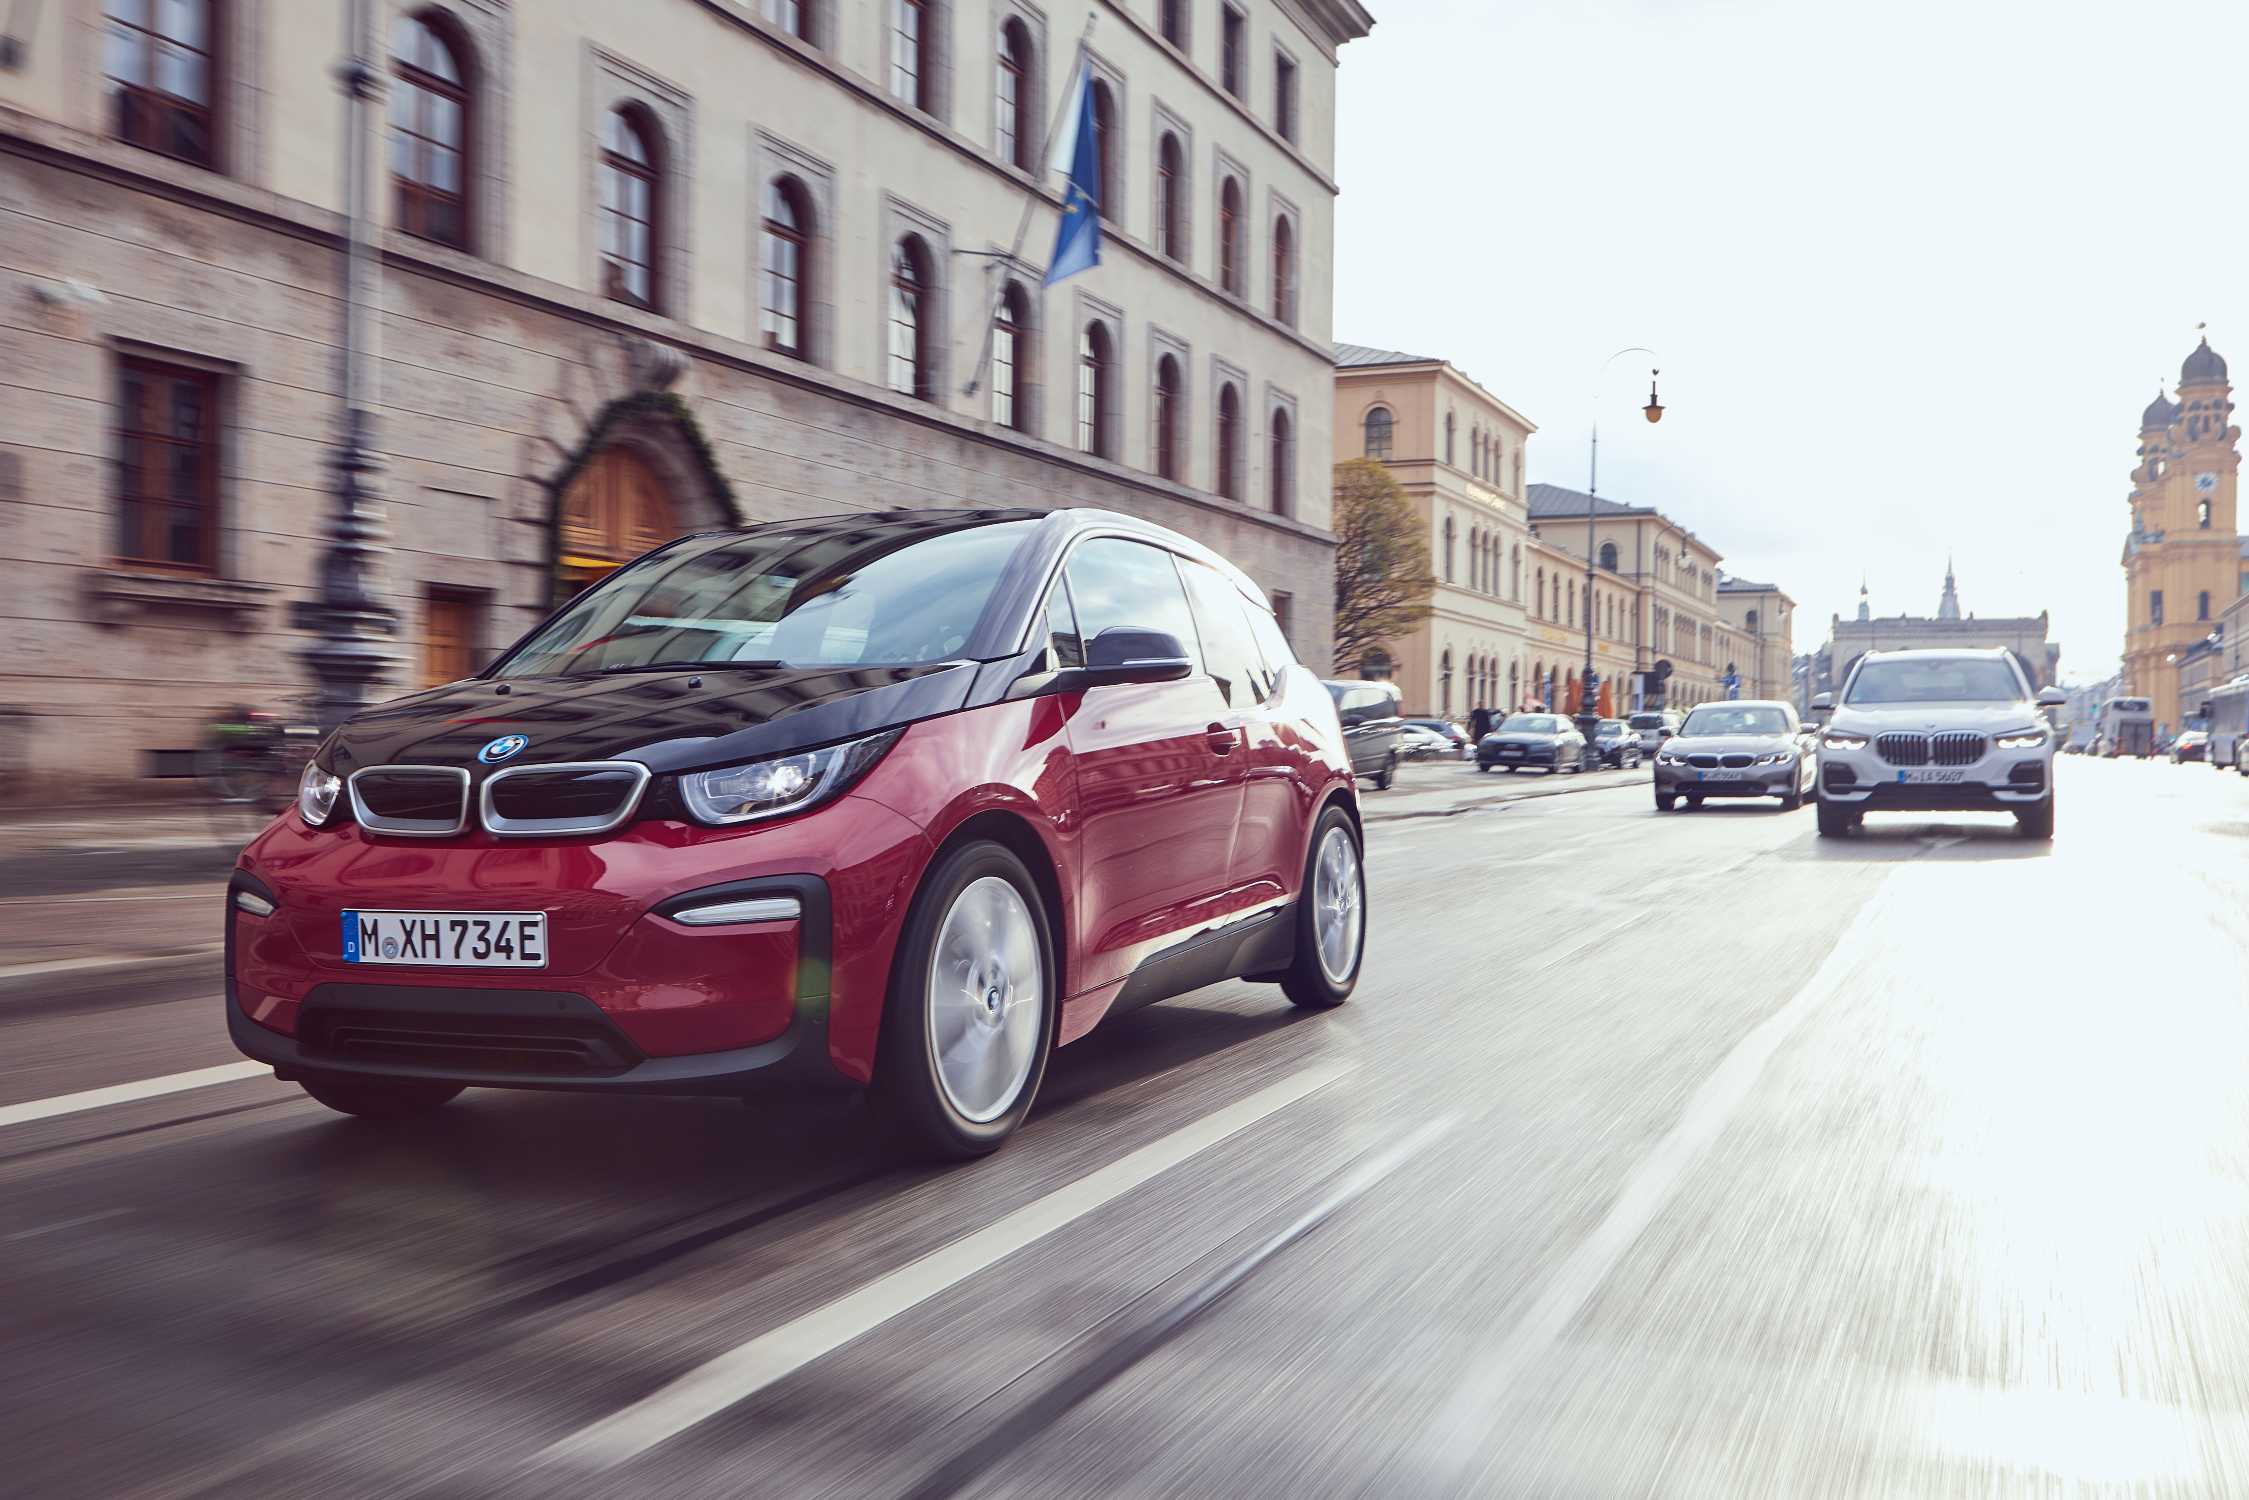 The BMW i3s, the BMW X5 xDrive45e and  the BMW 330 Sedan (03/2019).